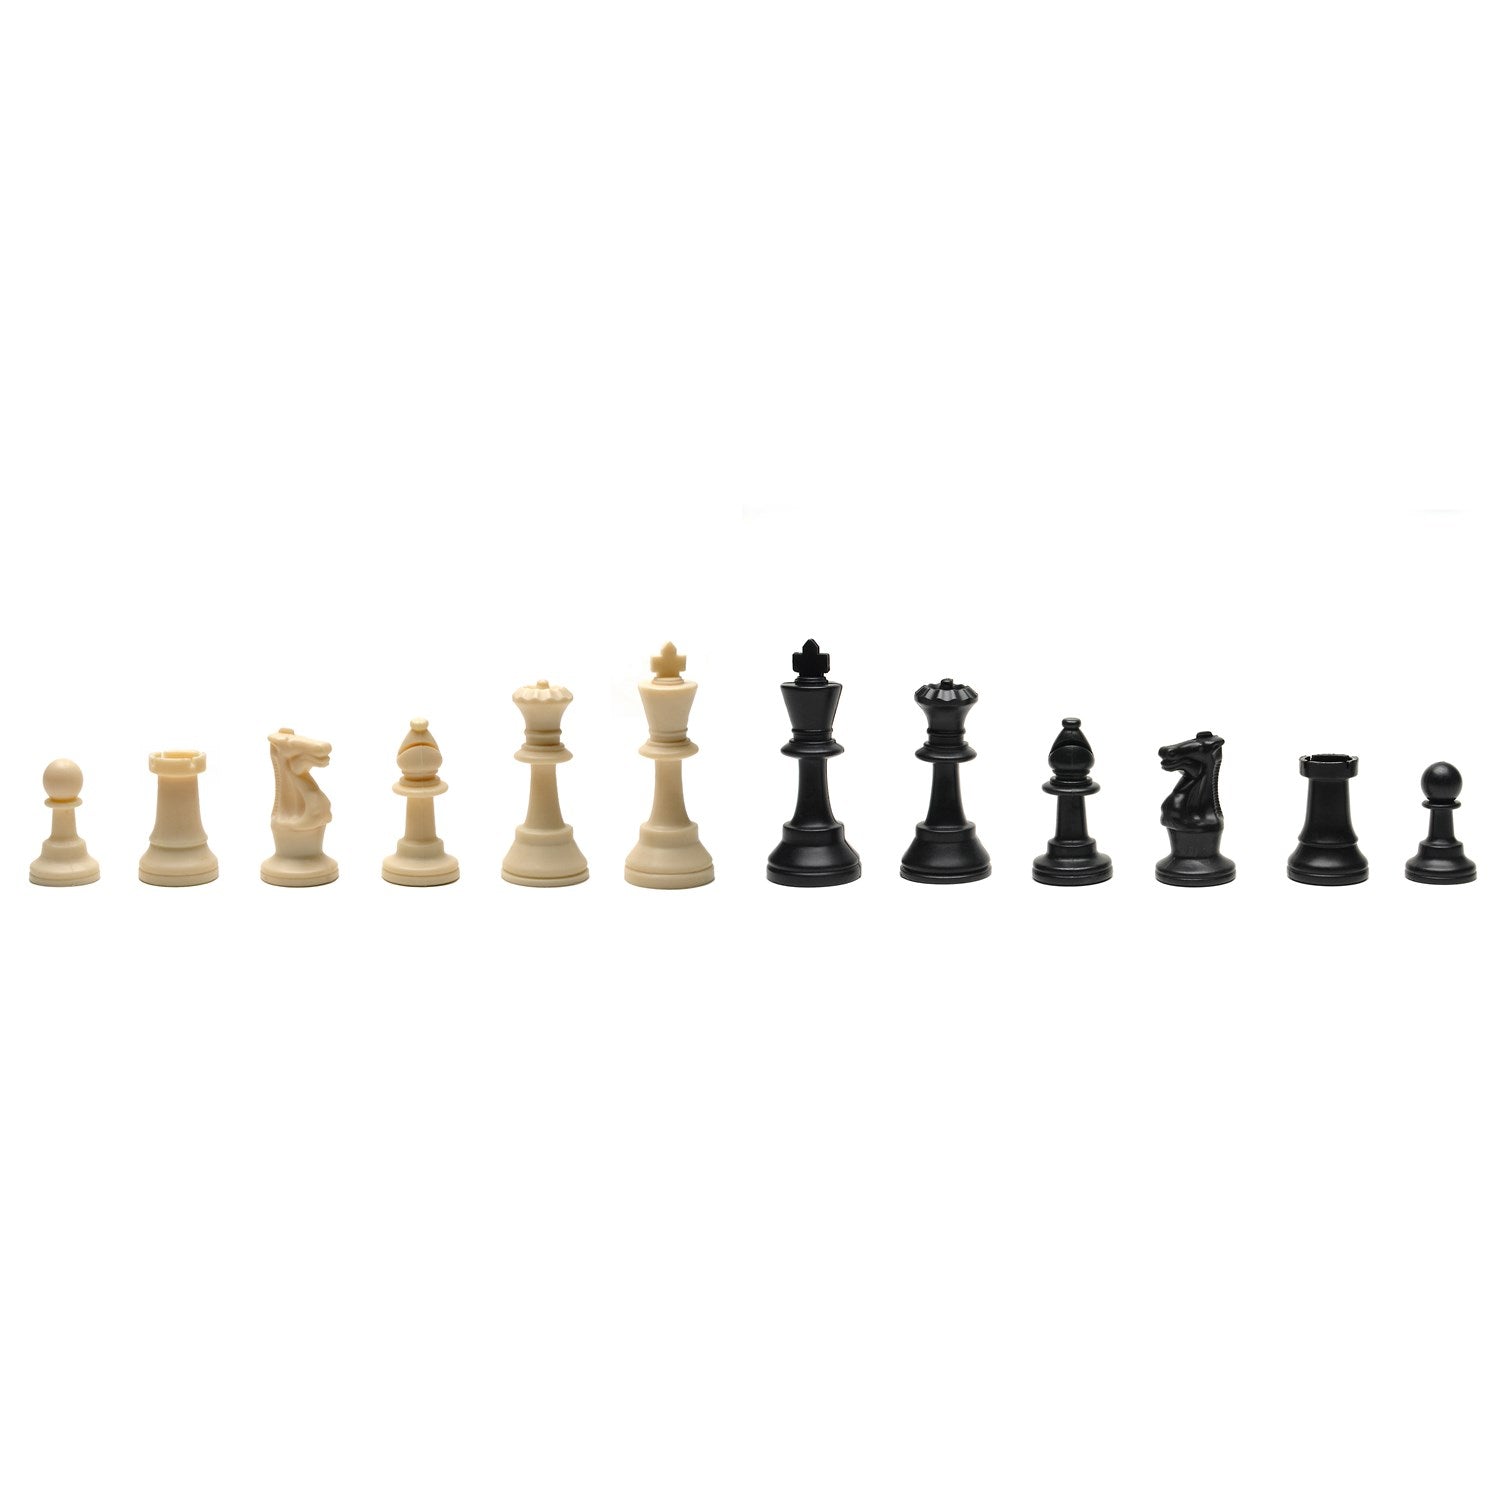 Double Weighted Plastic Chessmen - 3.75"